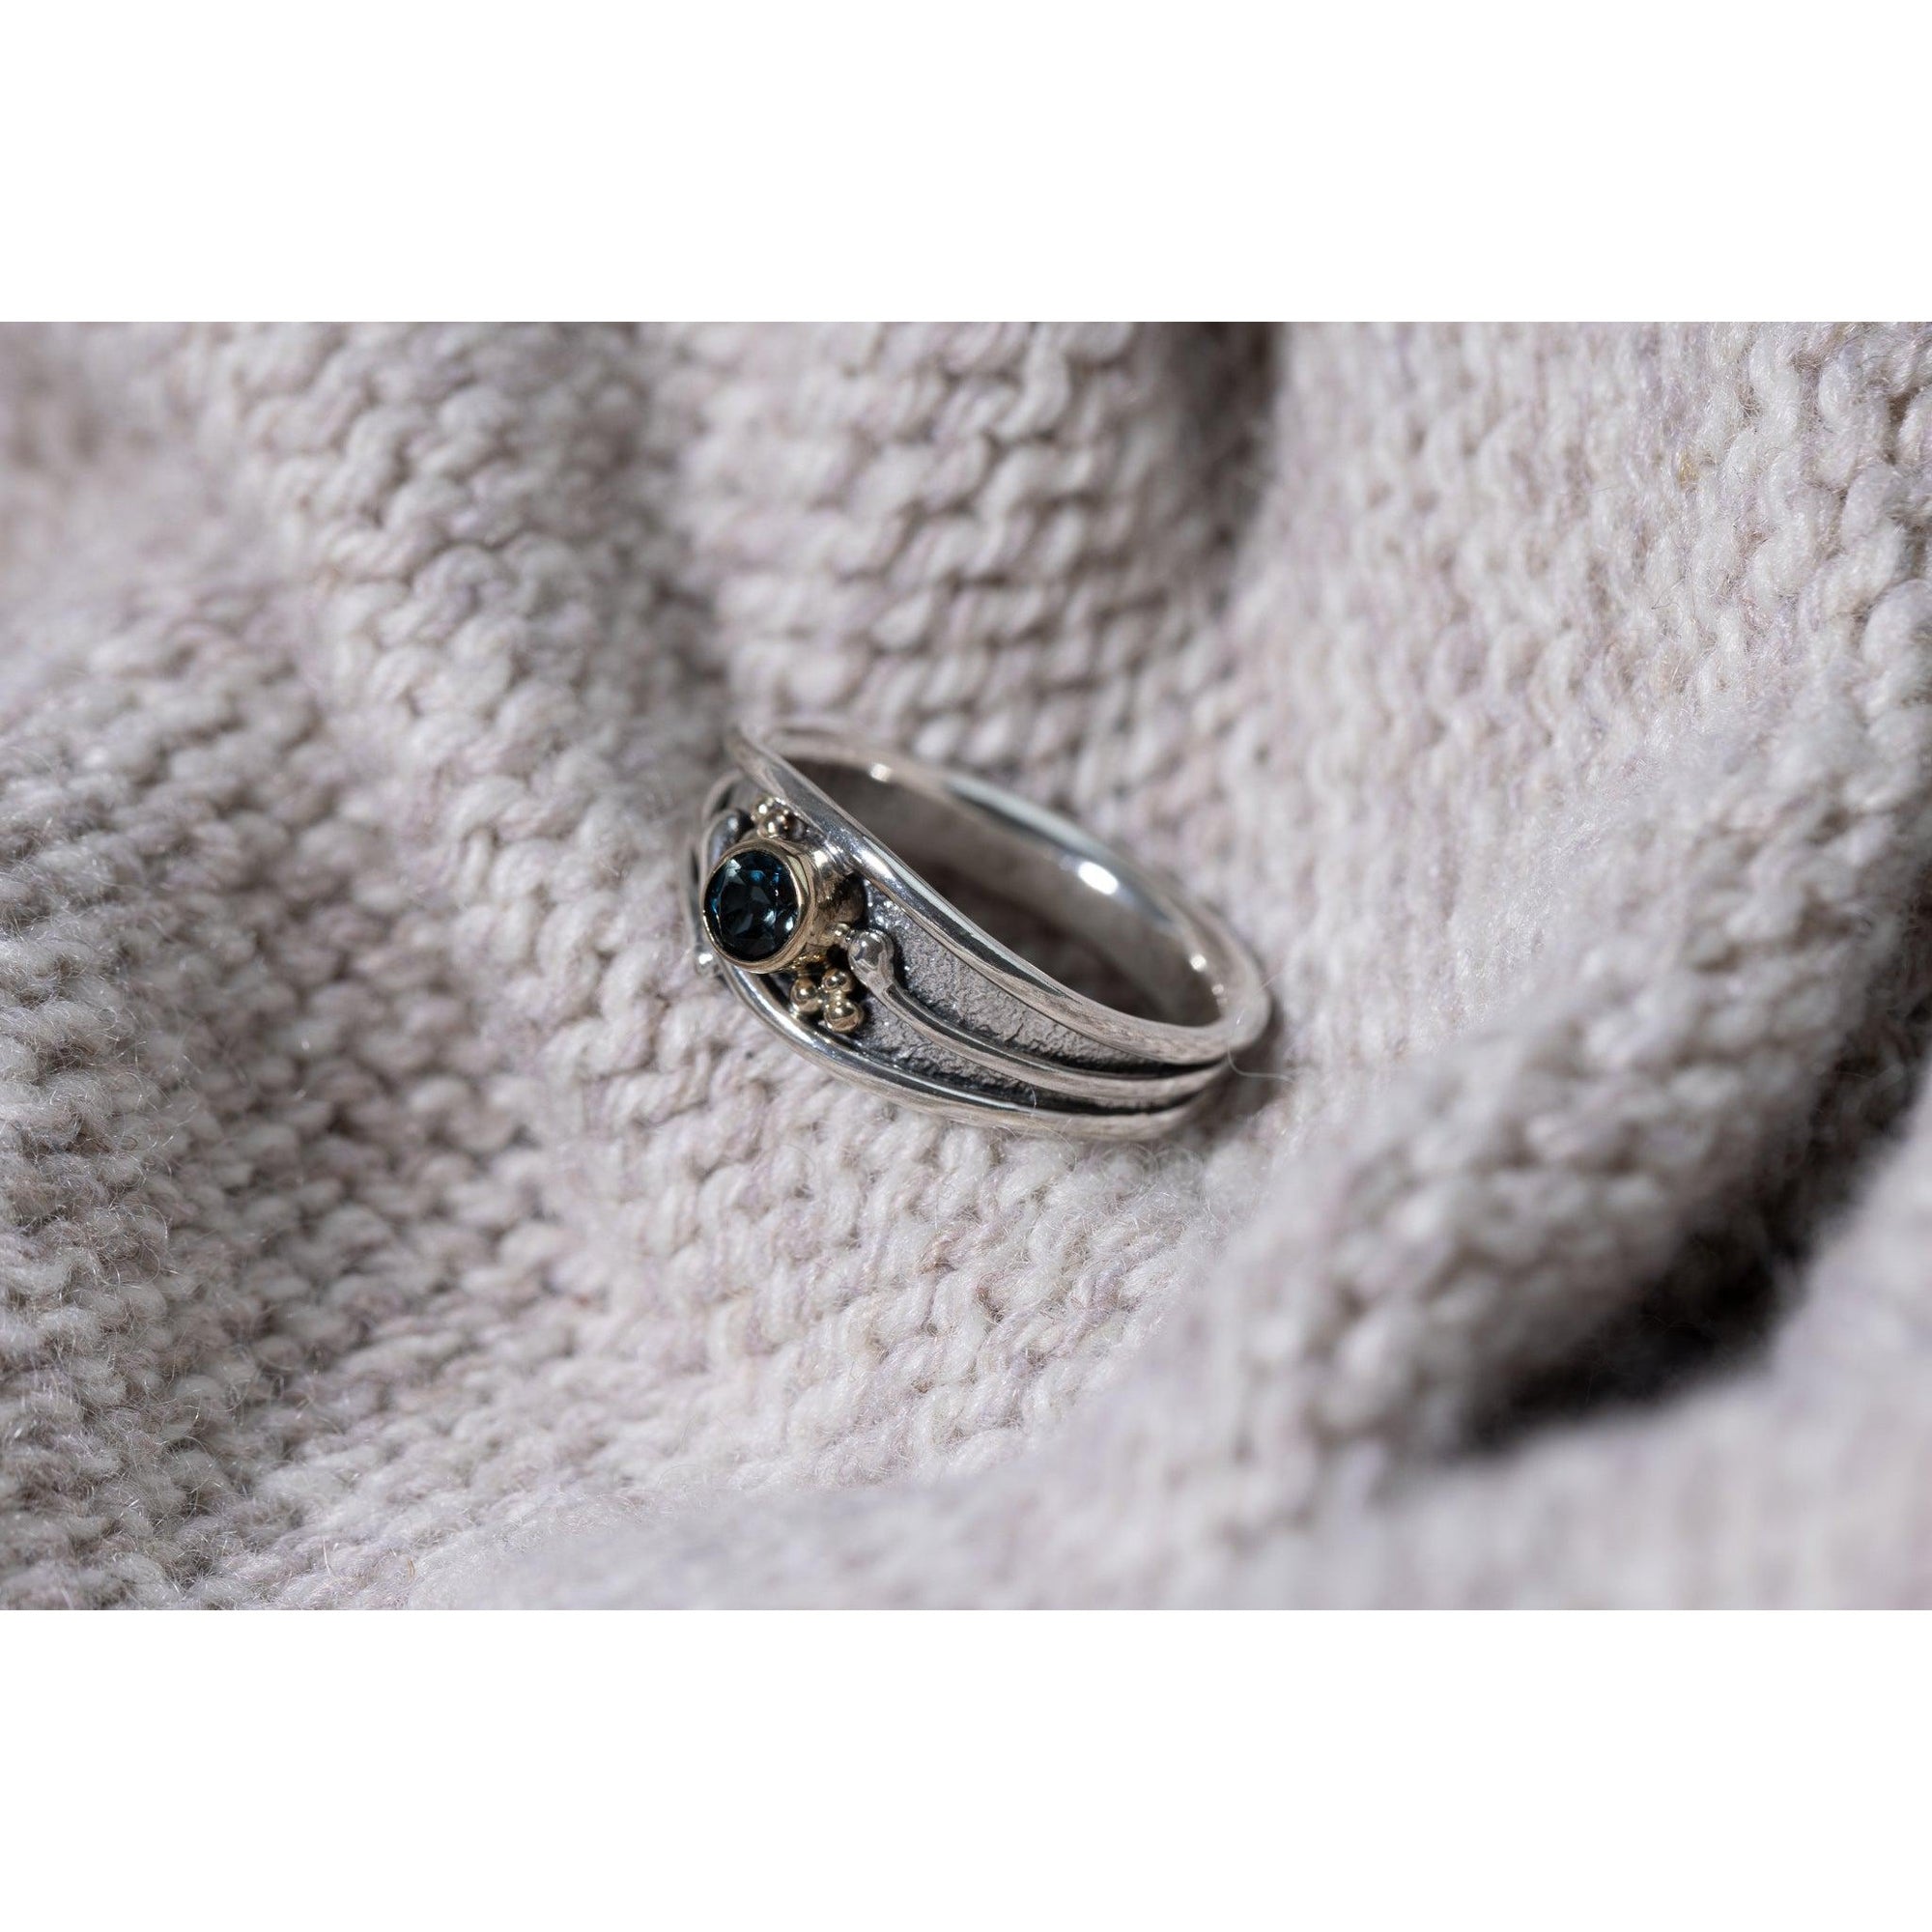 'LG65 - Silver Ring with 9ct Gold 4mm London Blue Topaz Ring ' by Les Grimshaw, available at Padstow Gallery, Cornwall